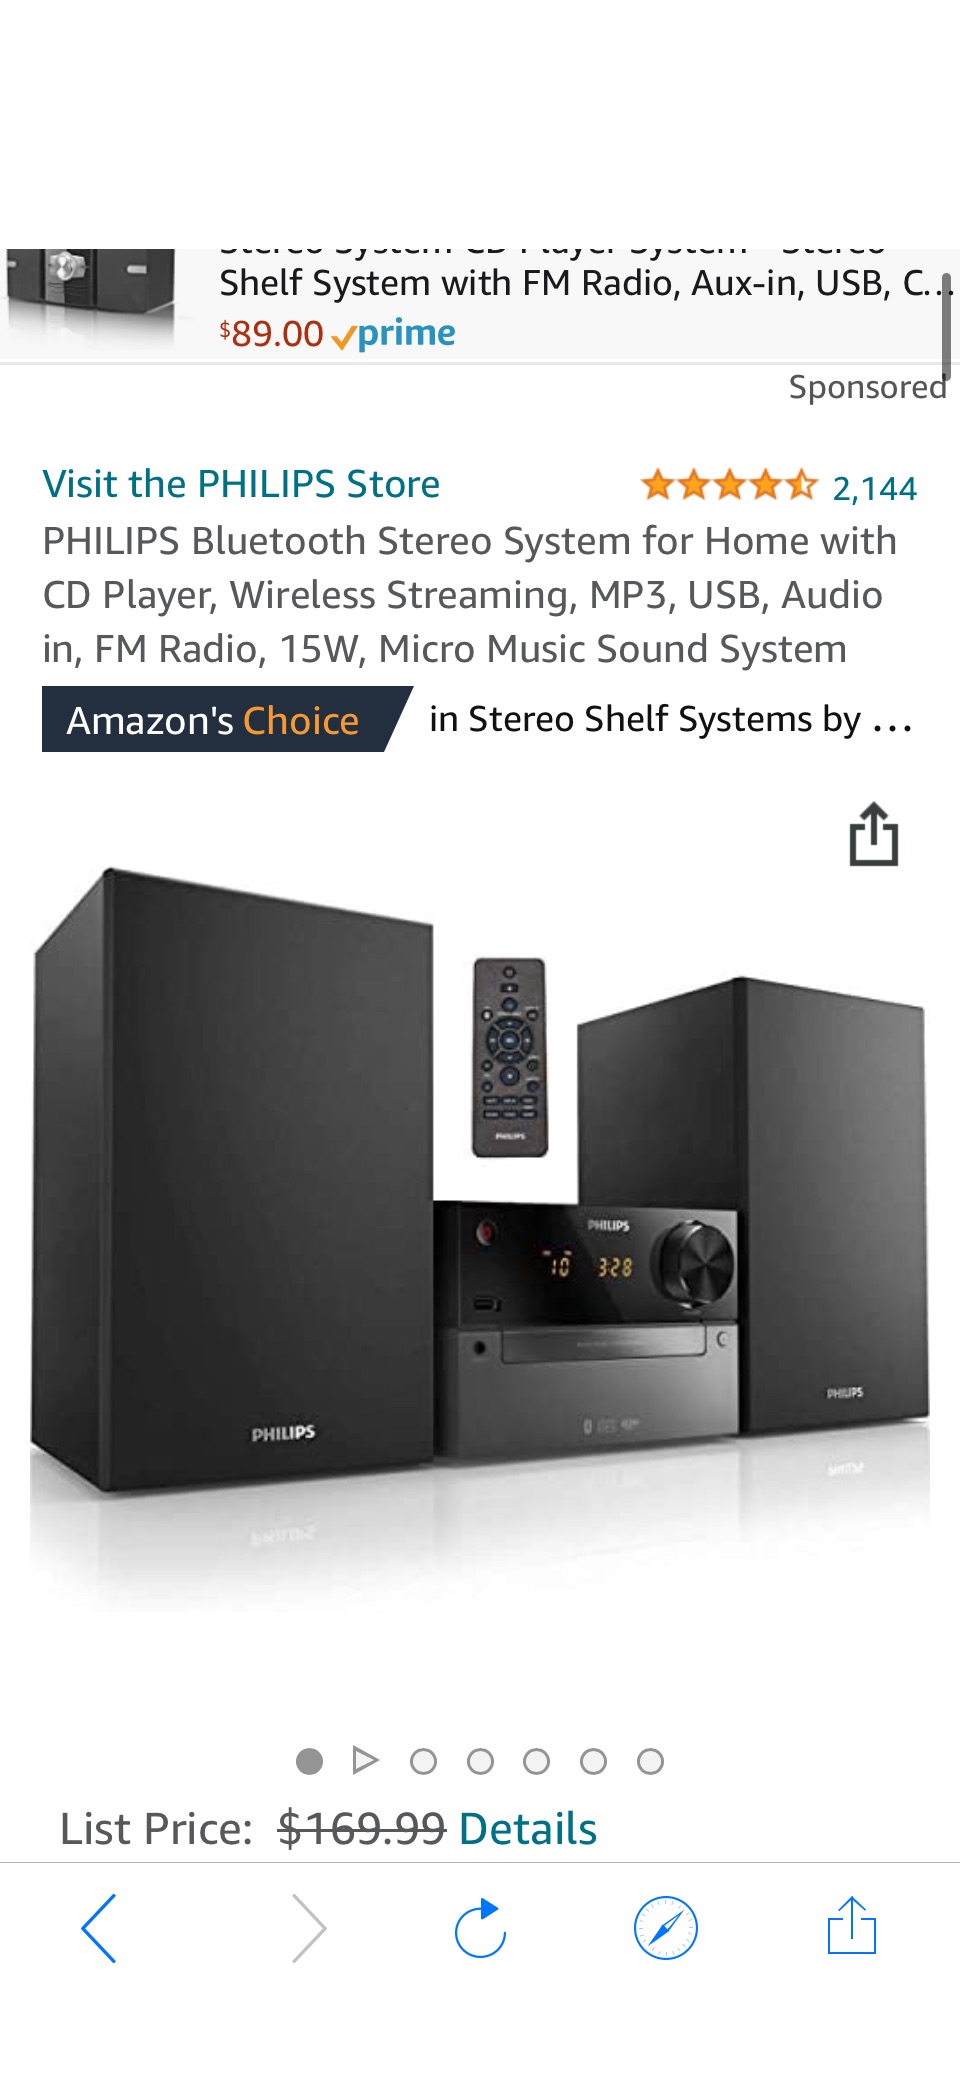 Amazon.com: PHILIPS Bluetooth Stereo System for Home with CD 